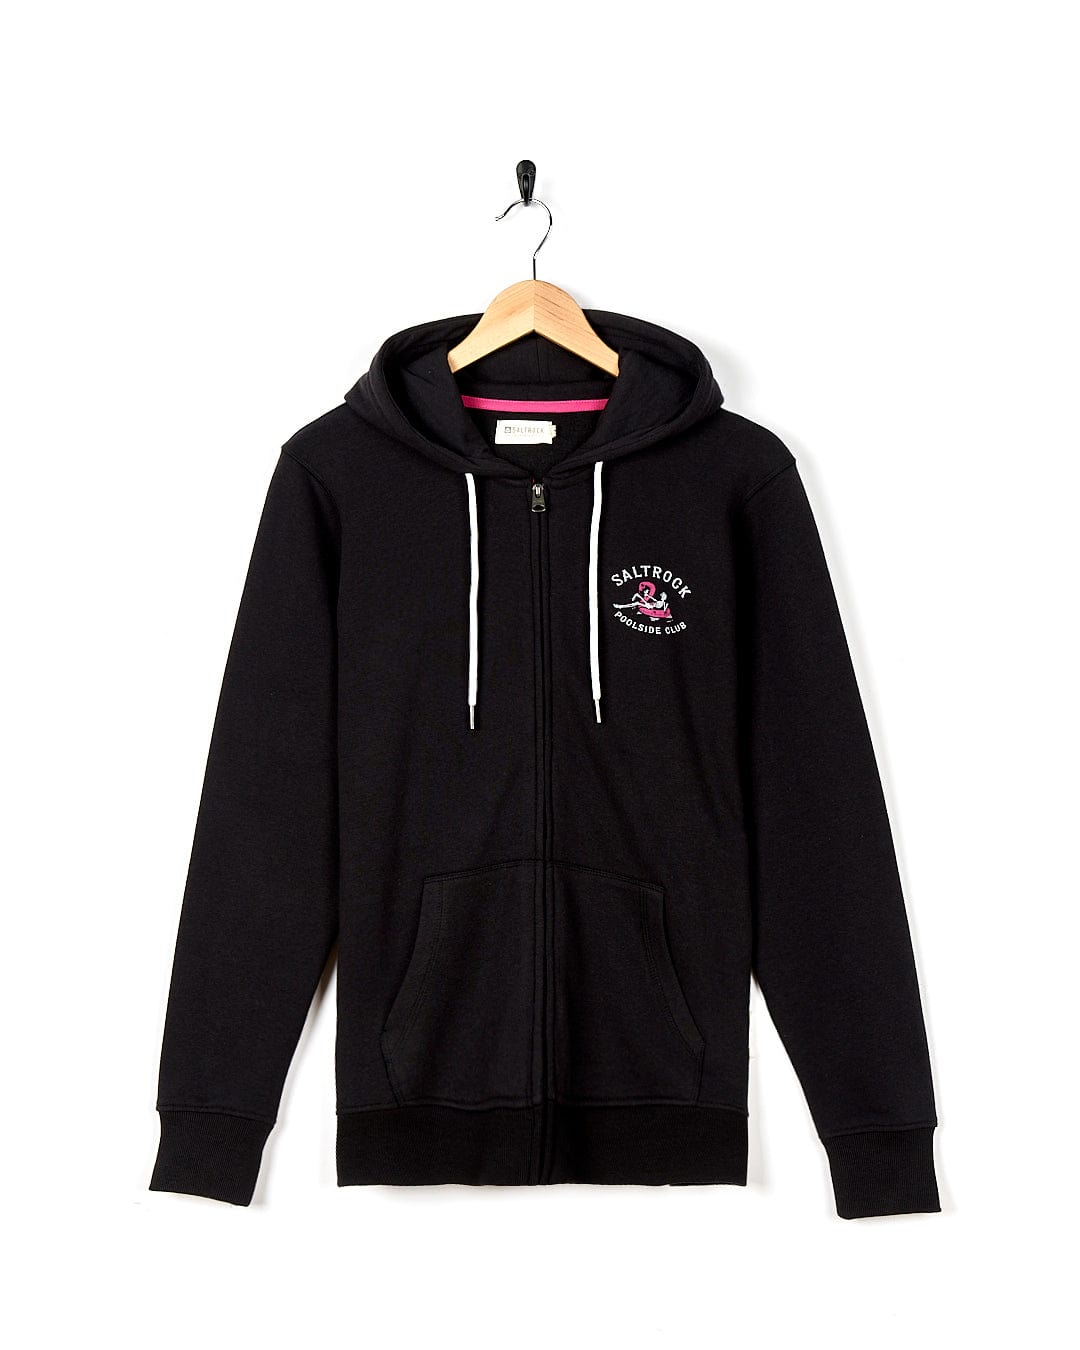 A Lee-Ann - Womens Zip Hoodie - Black with a pink logo on it.